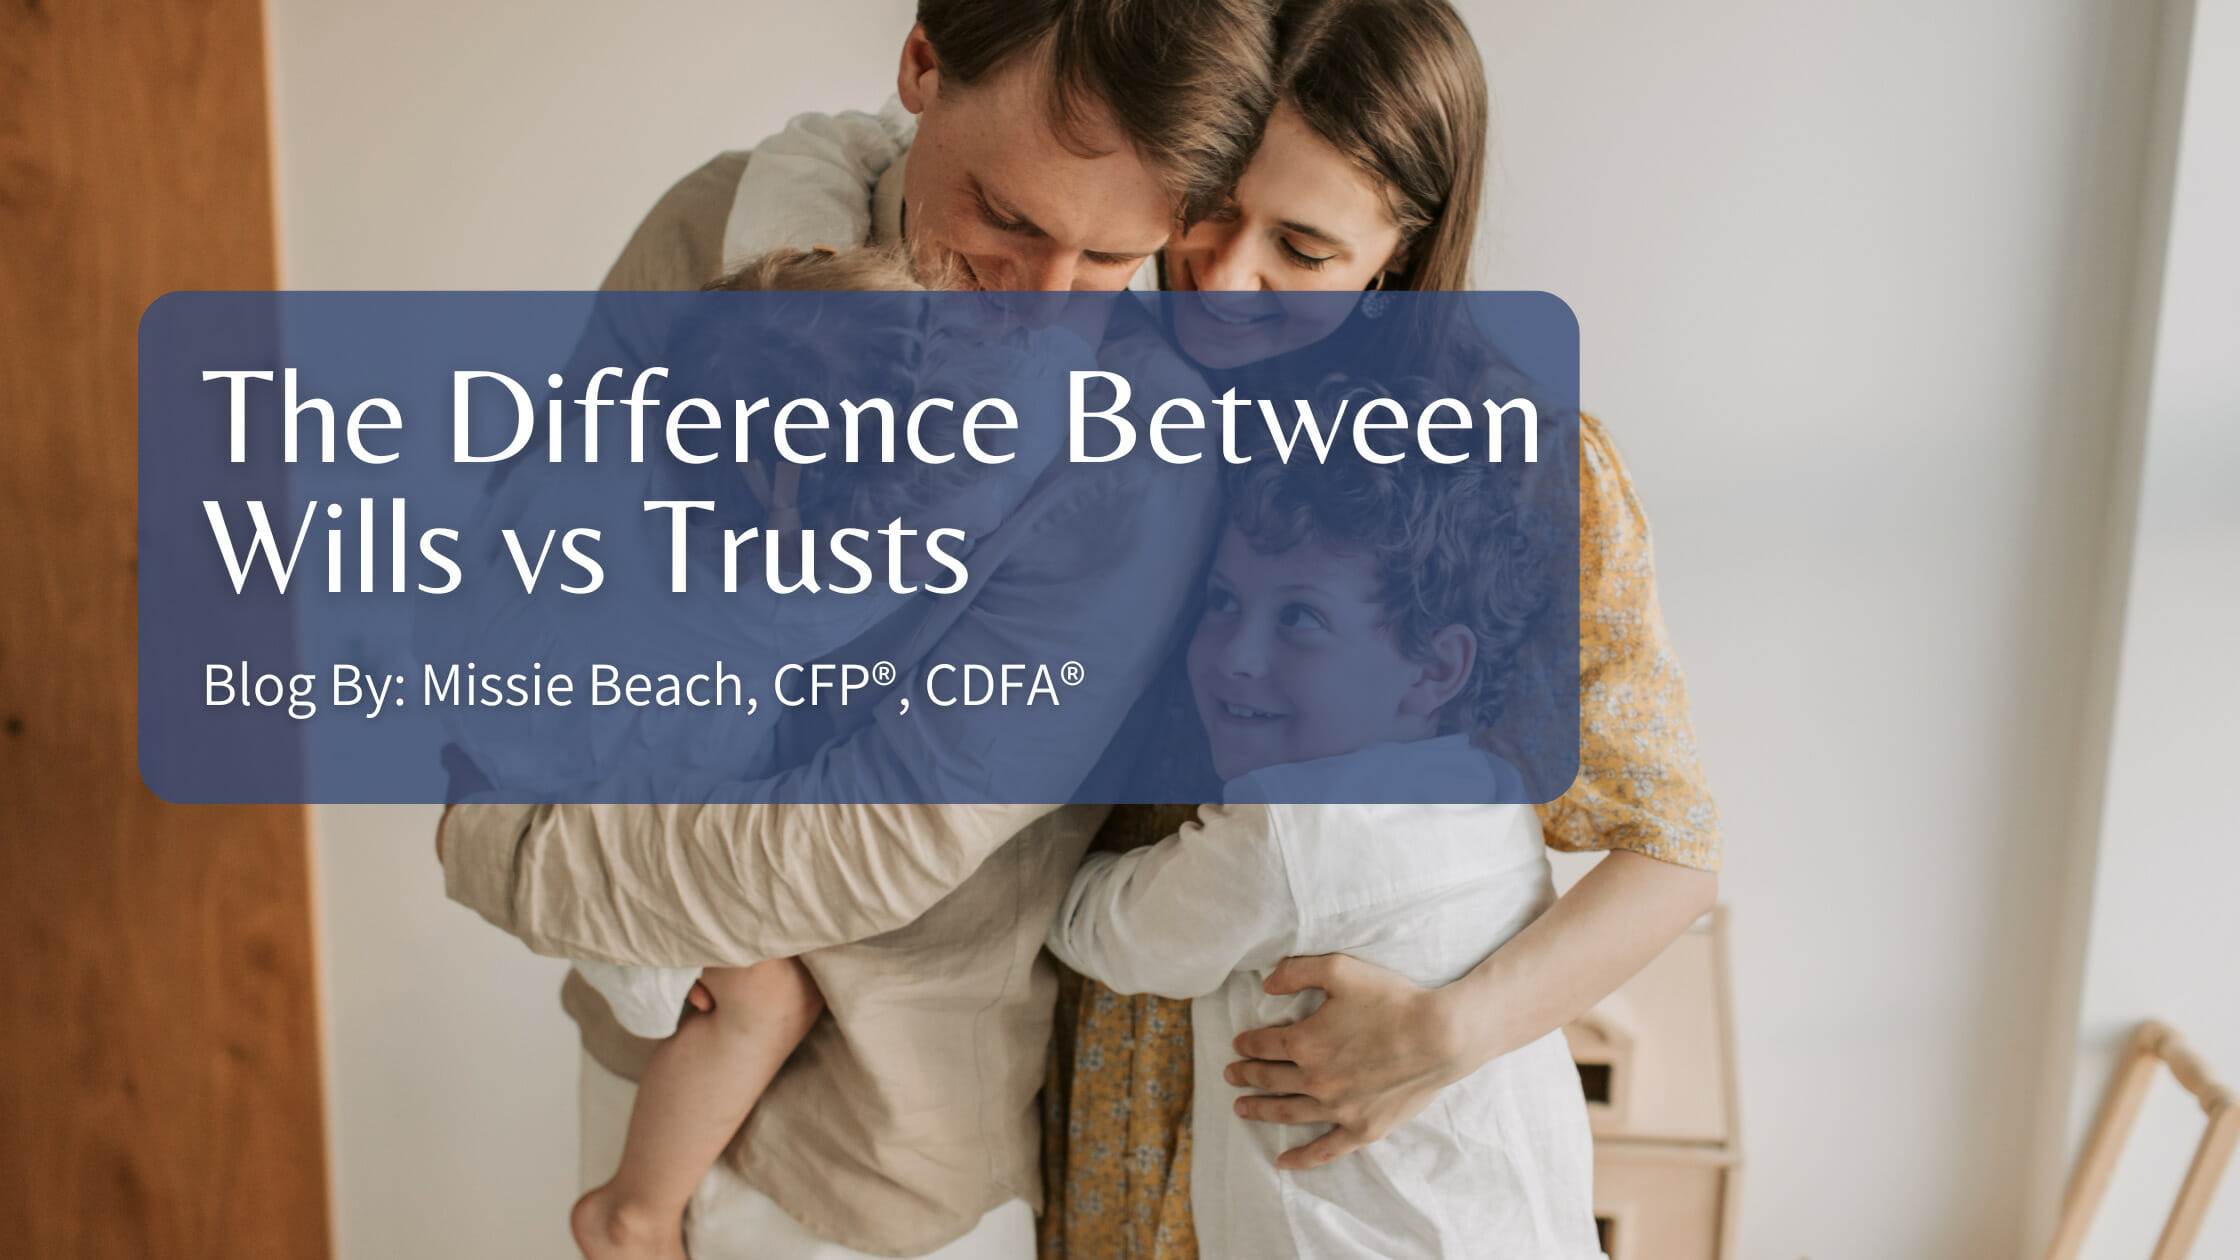 The Difference Between Wills vs Trusts